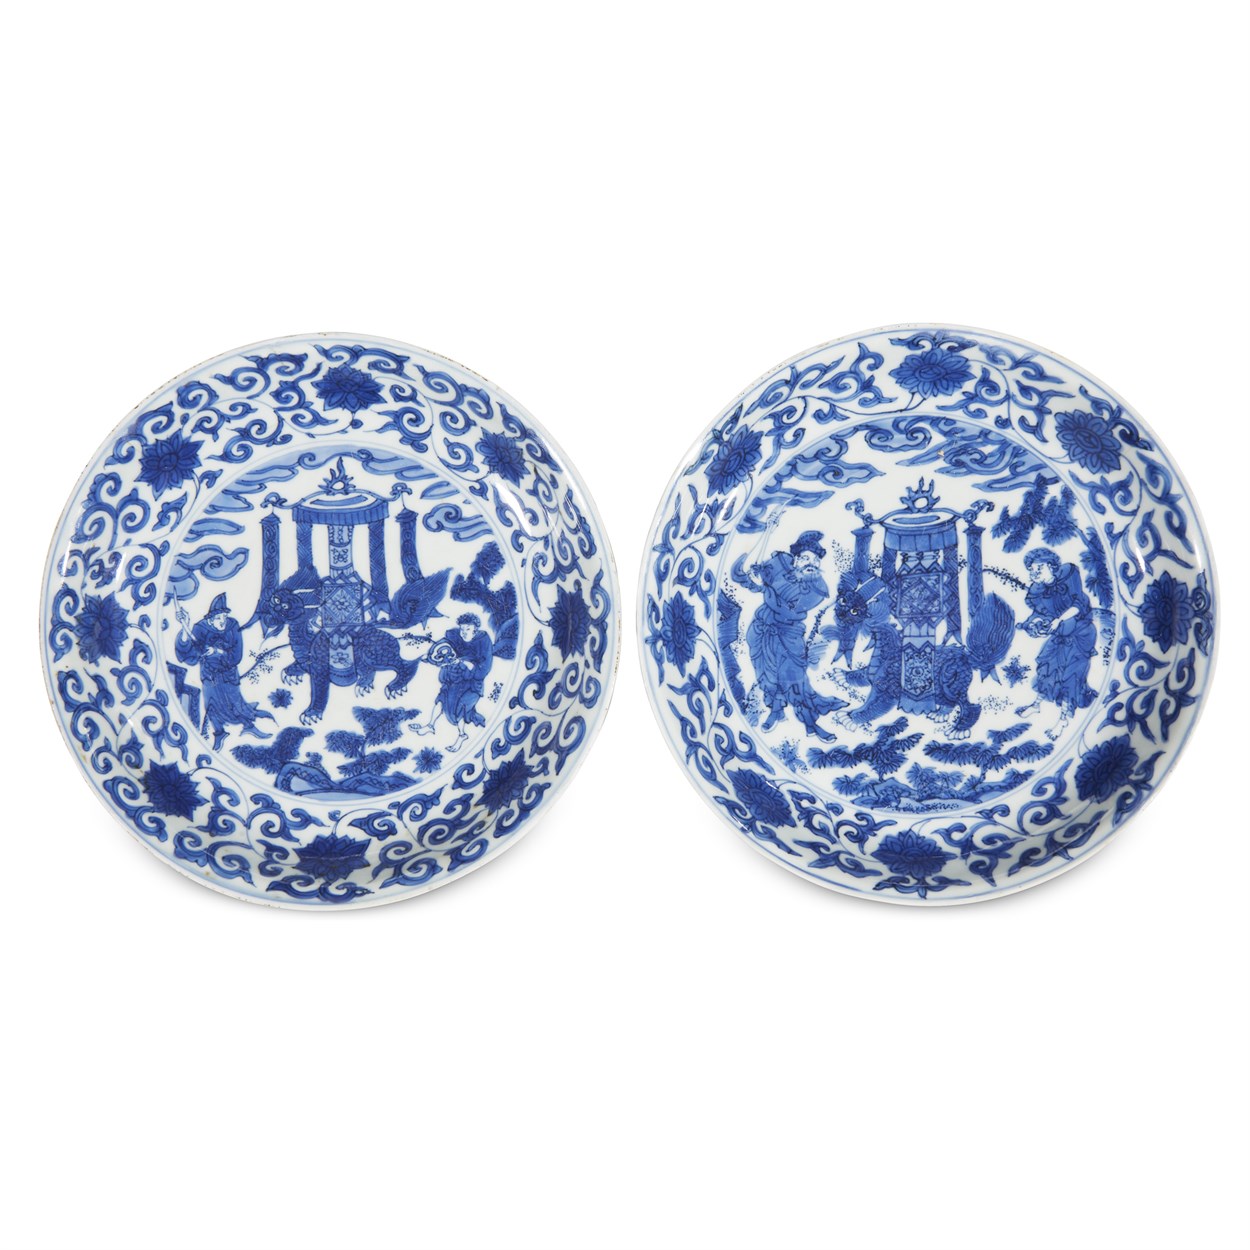 Lot 79 - A matched pair of blue and white porcelain "Qilin and Foreign Attendants" dishes